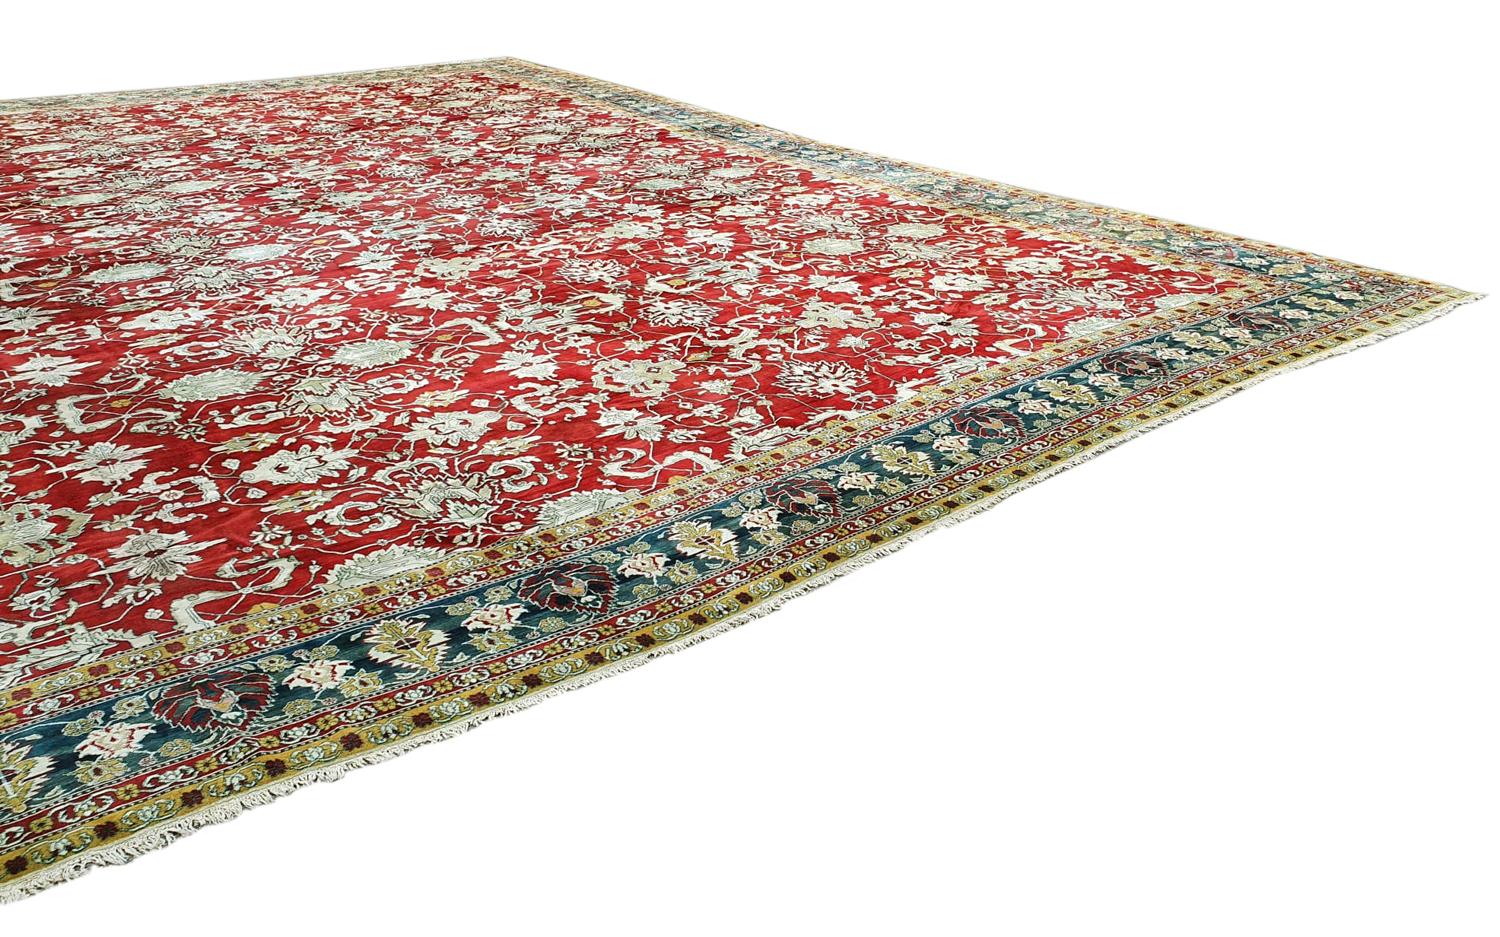 Oversized Indian Red & Green Wool Agra Palace Carpet, 19th Century For Sale 1